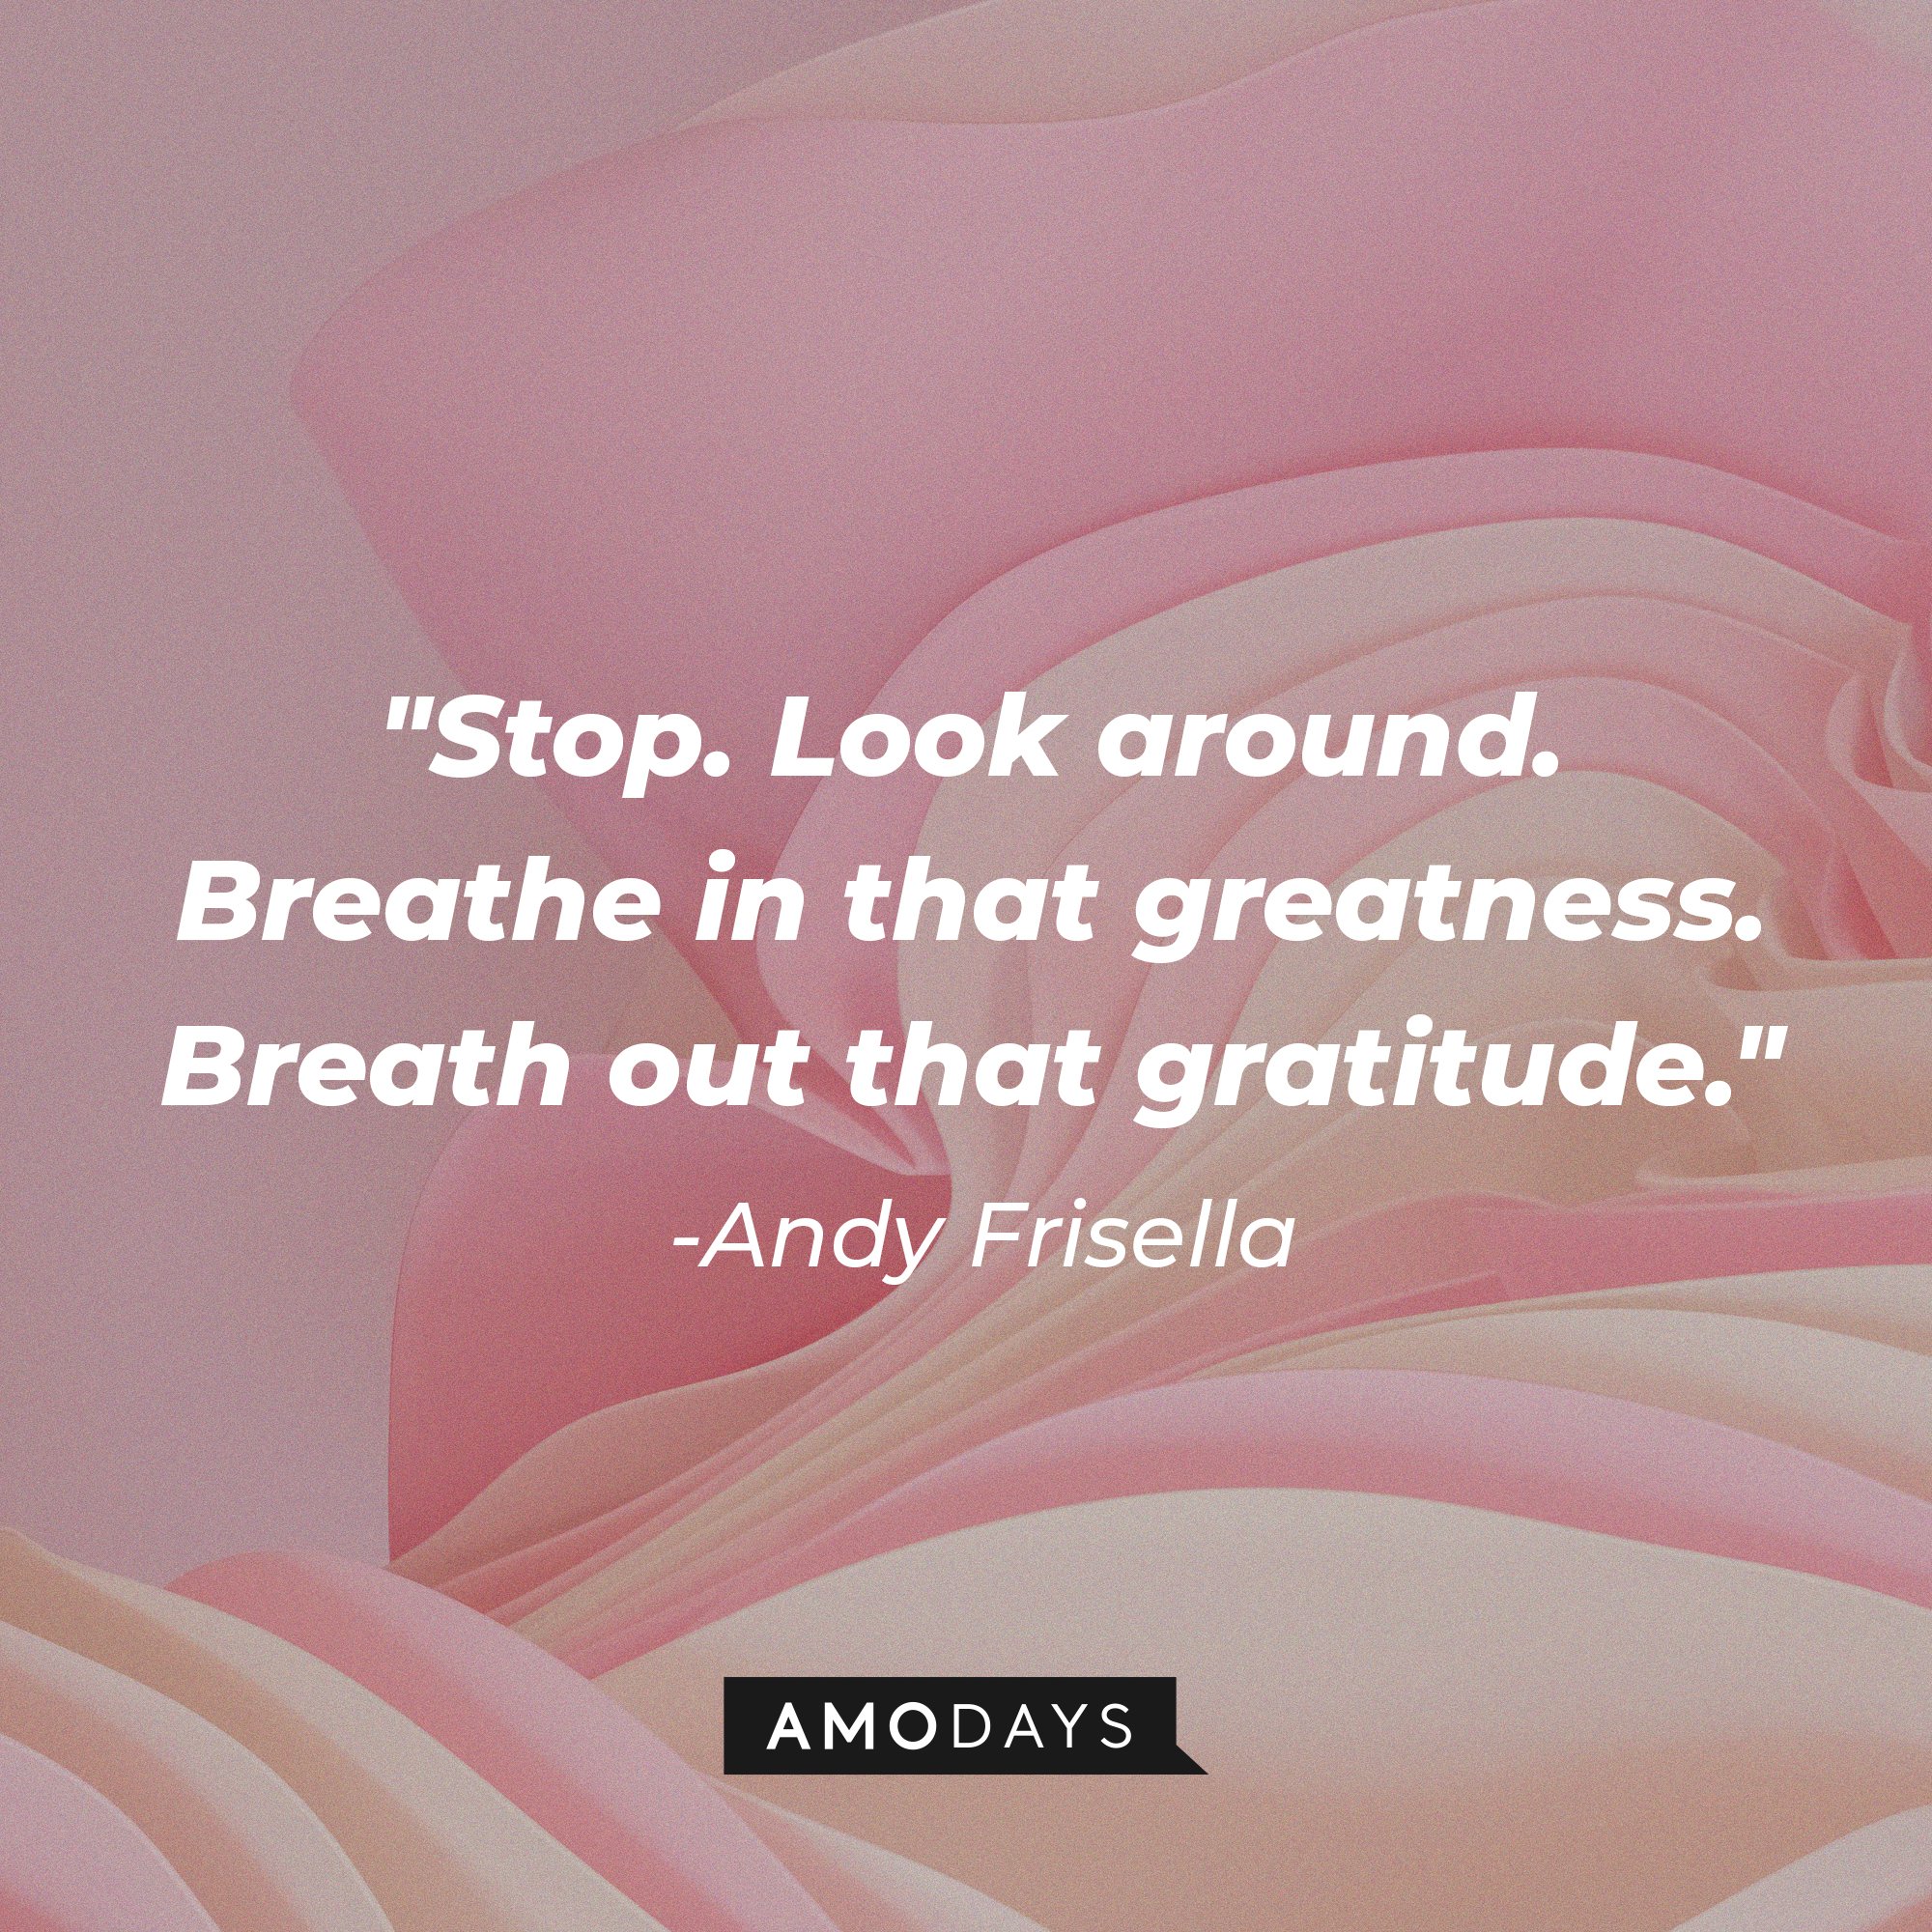 Andy Frisella's quote: "Stop. Look around. Breathe in that greatness. Breath out that gratitude." | Image: AmoDays